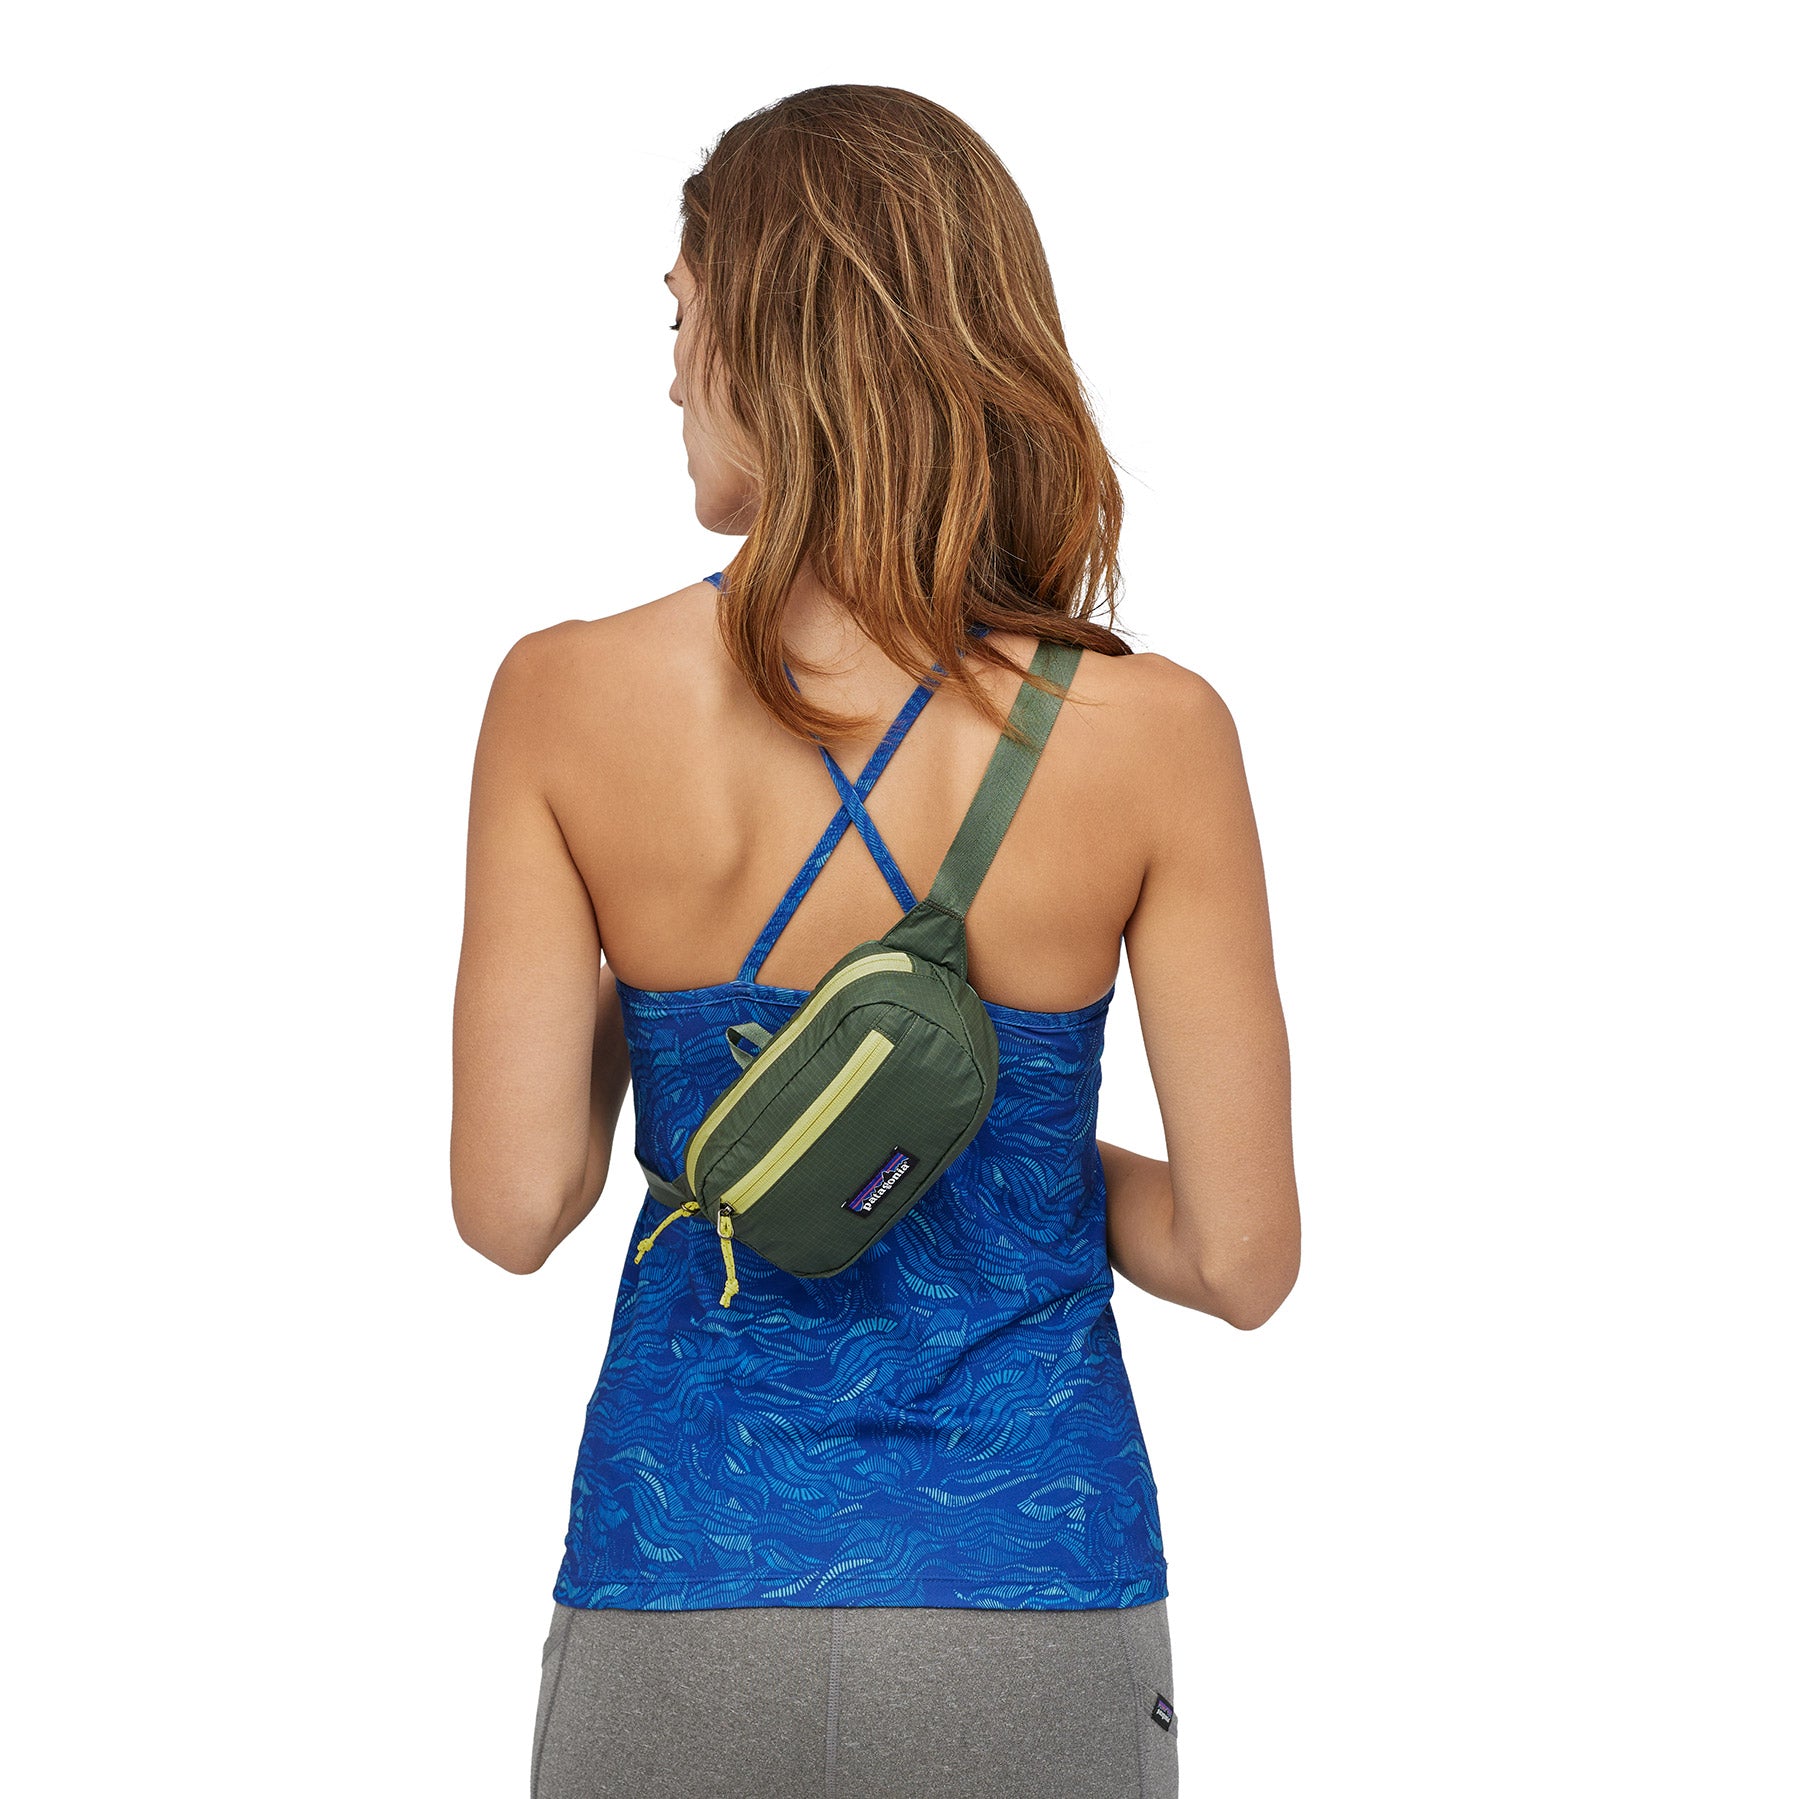 ultralight hip pack slung cross-body on live model in a green color